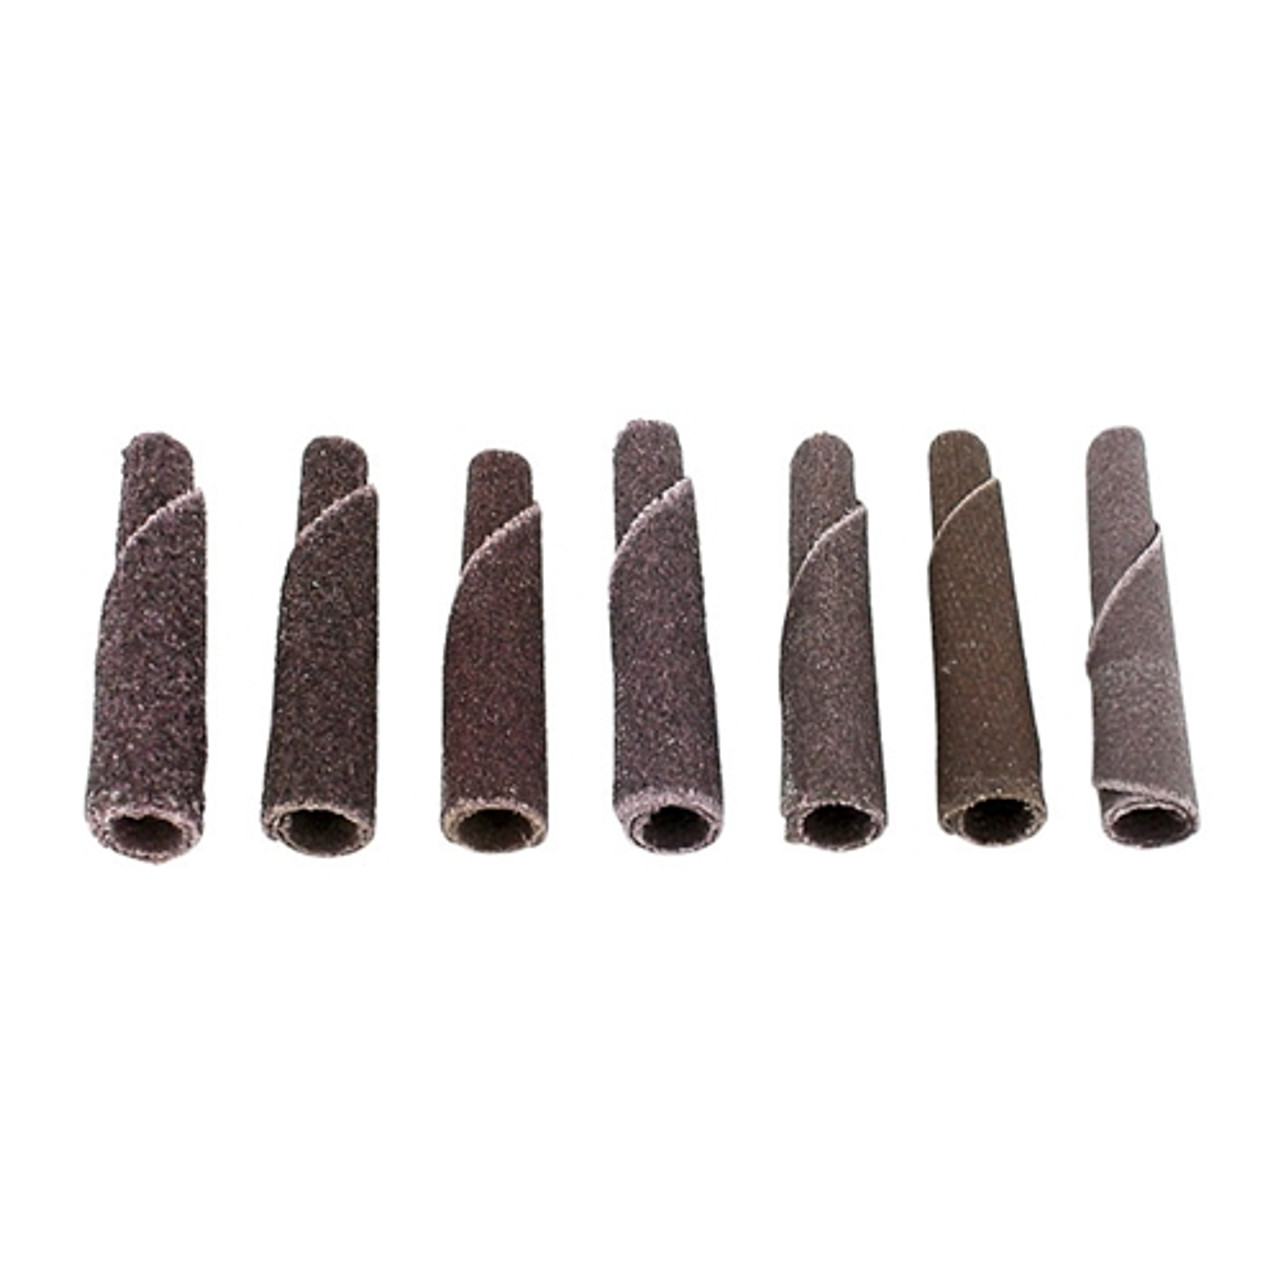 1-1/2" Tapered Cone Points - B-2, 100 Grit